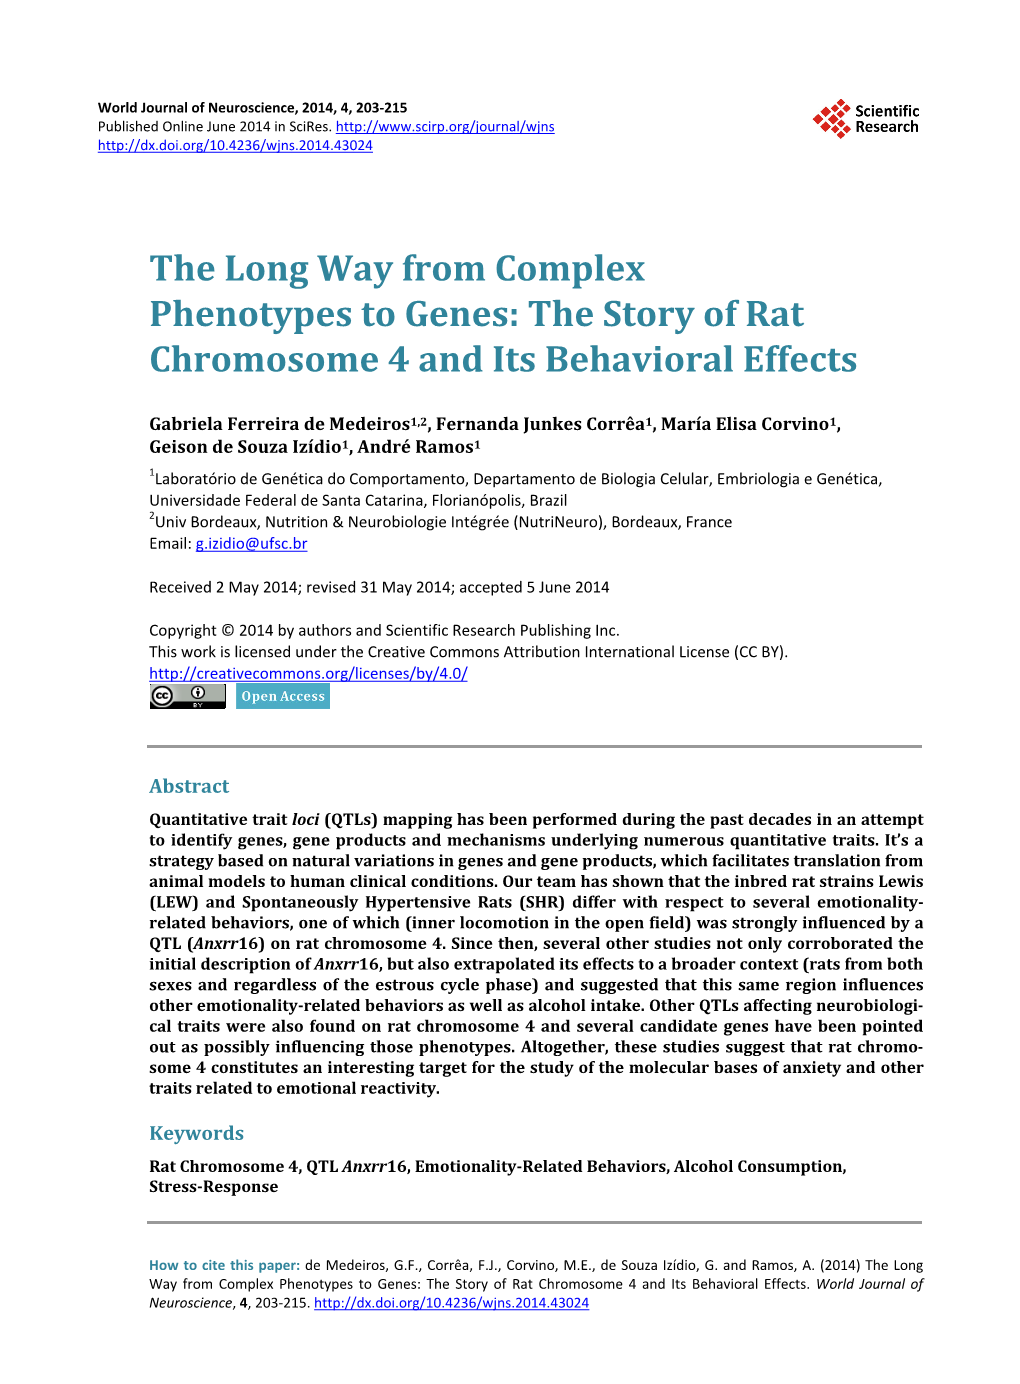 The Story of Rat Chromosome 4 and Its Behavioral Effects